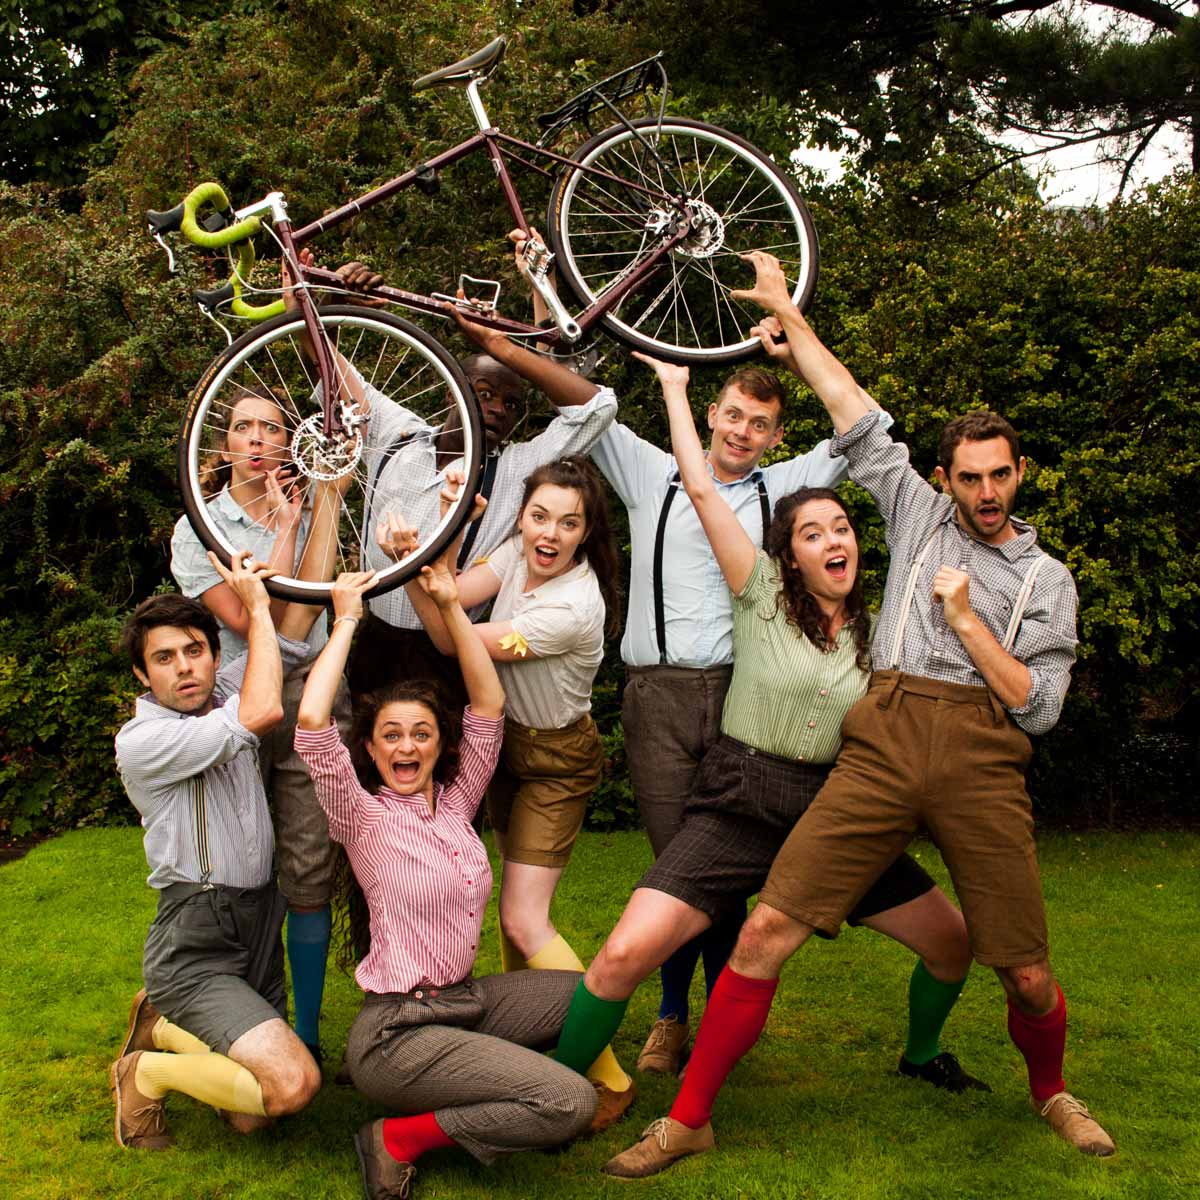 8 people holding up a bike dressed in period costumes